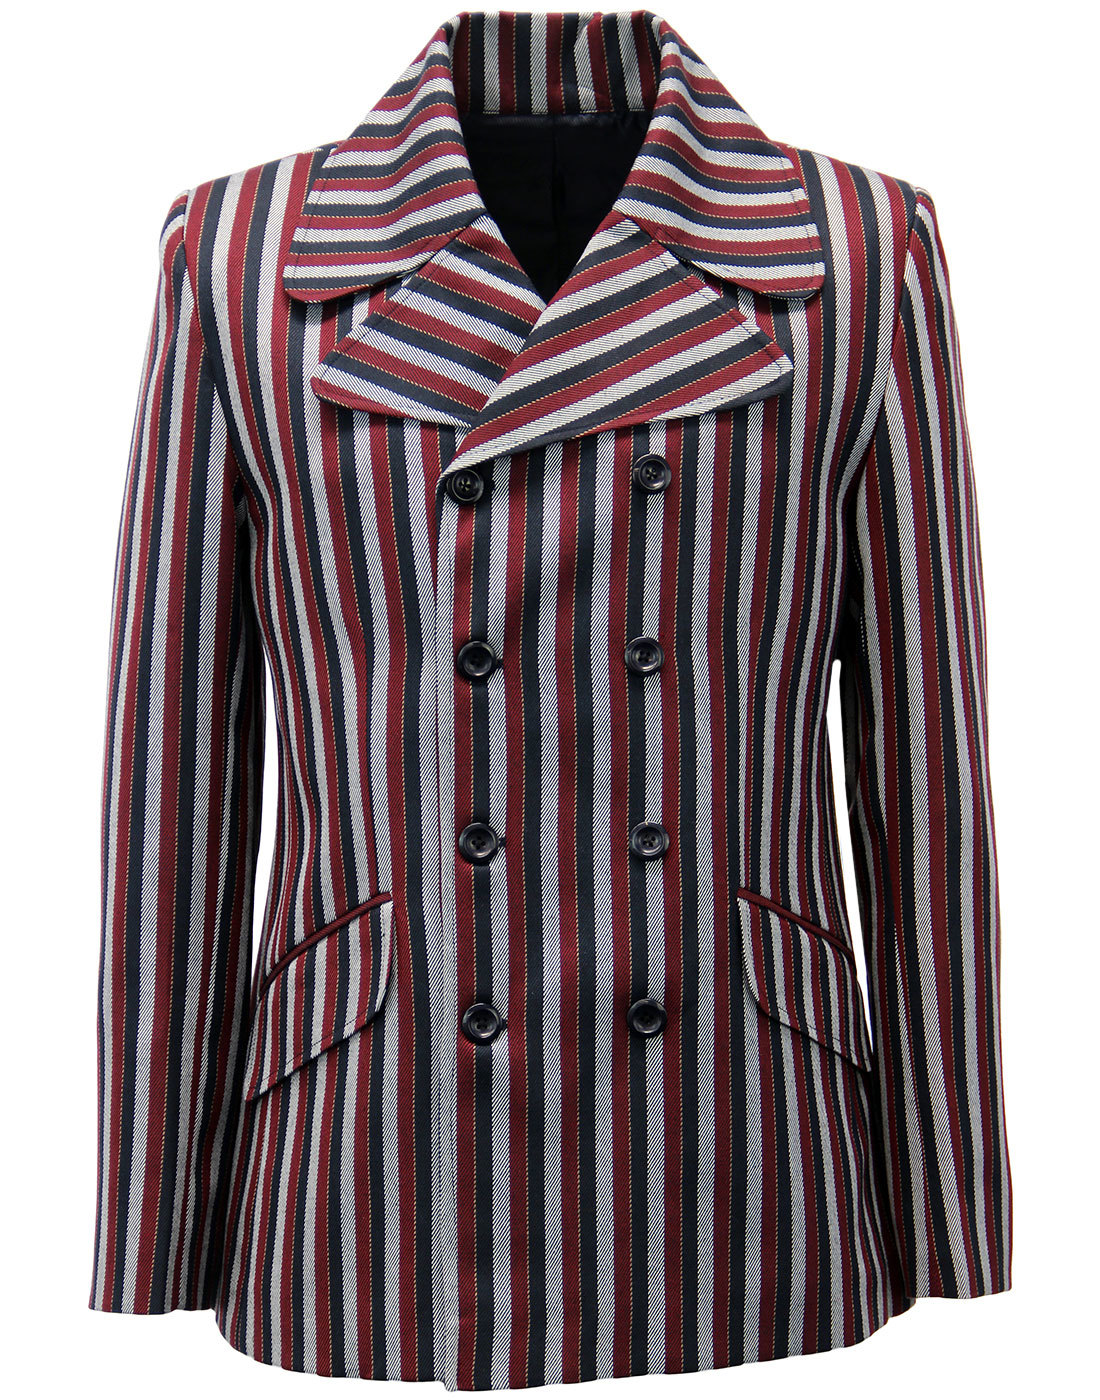 madcap england tampa mod double breasted blazer